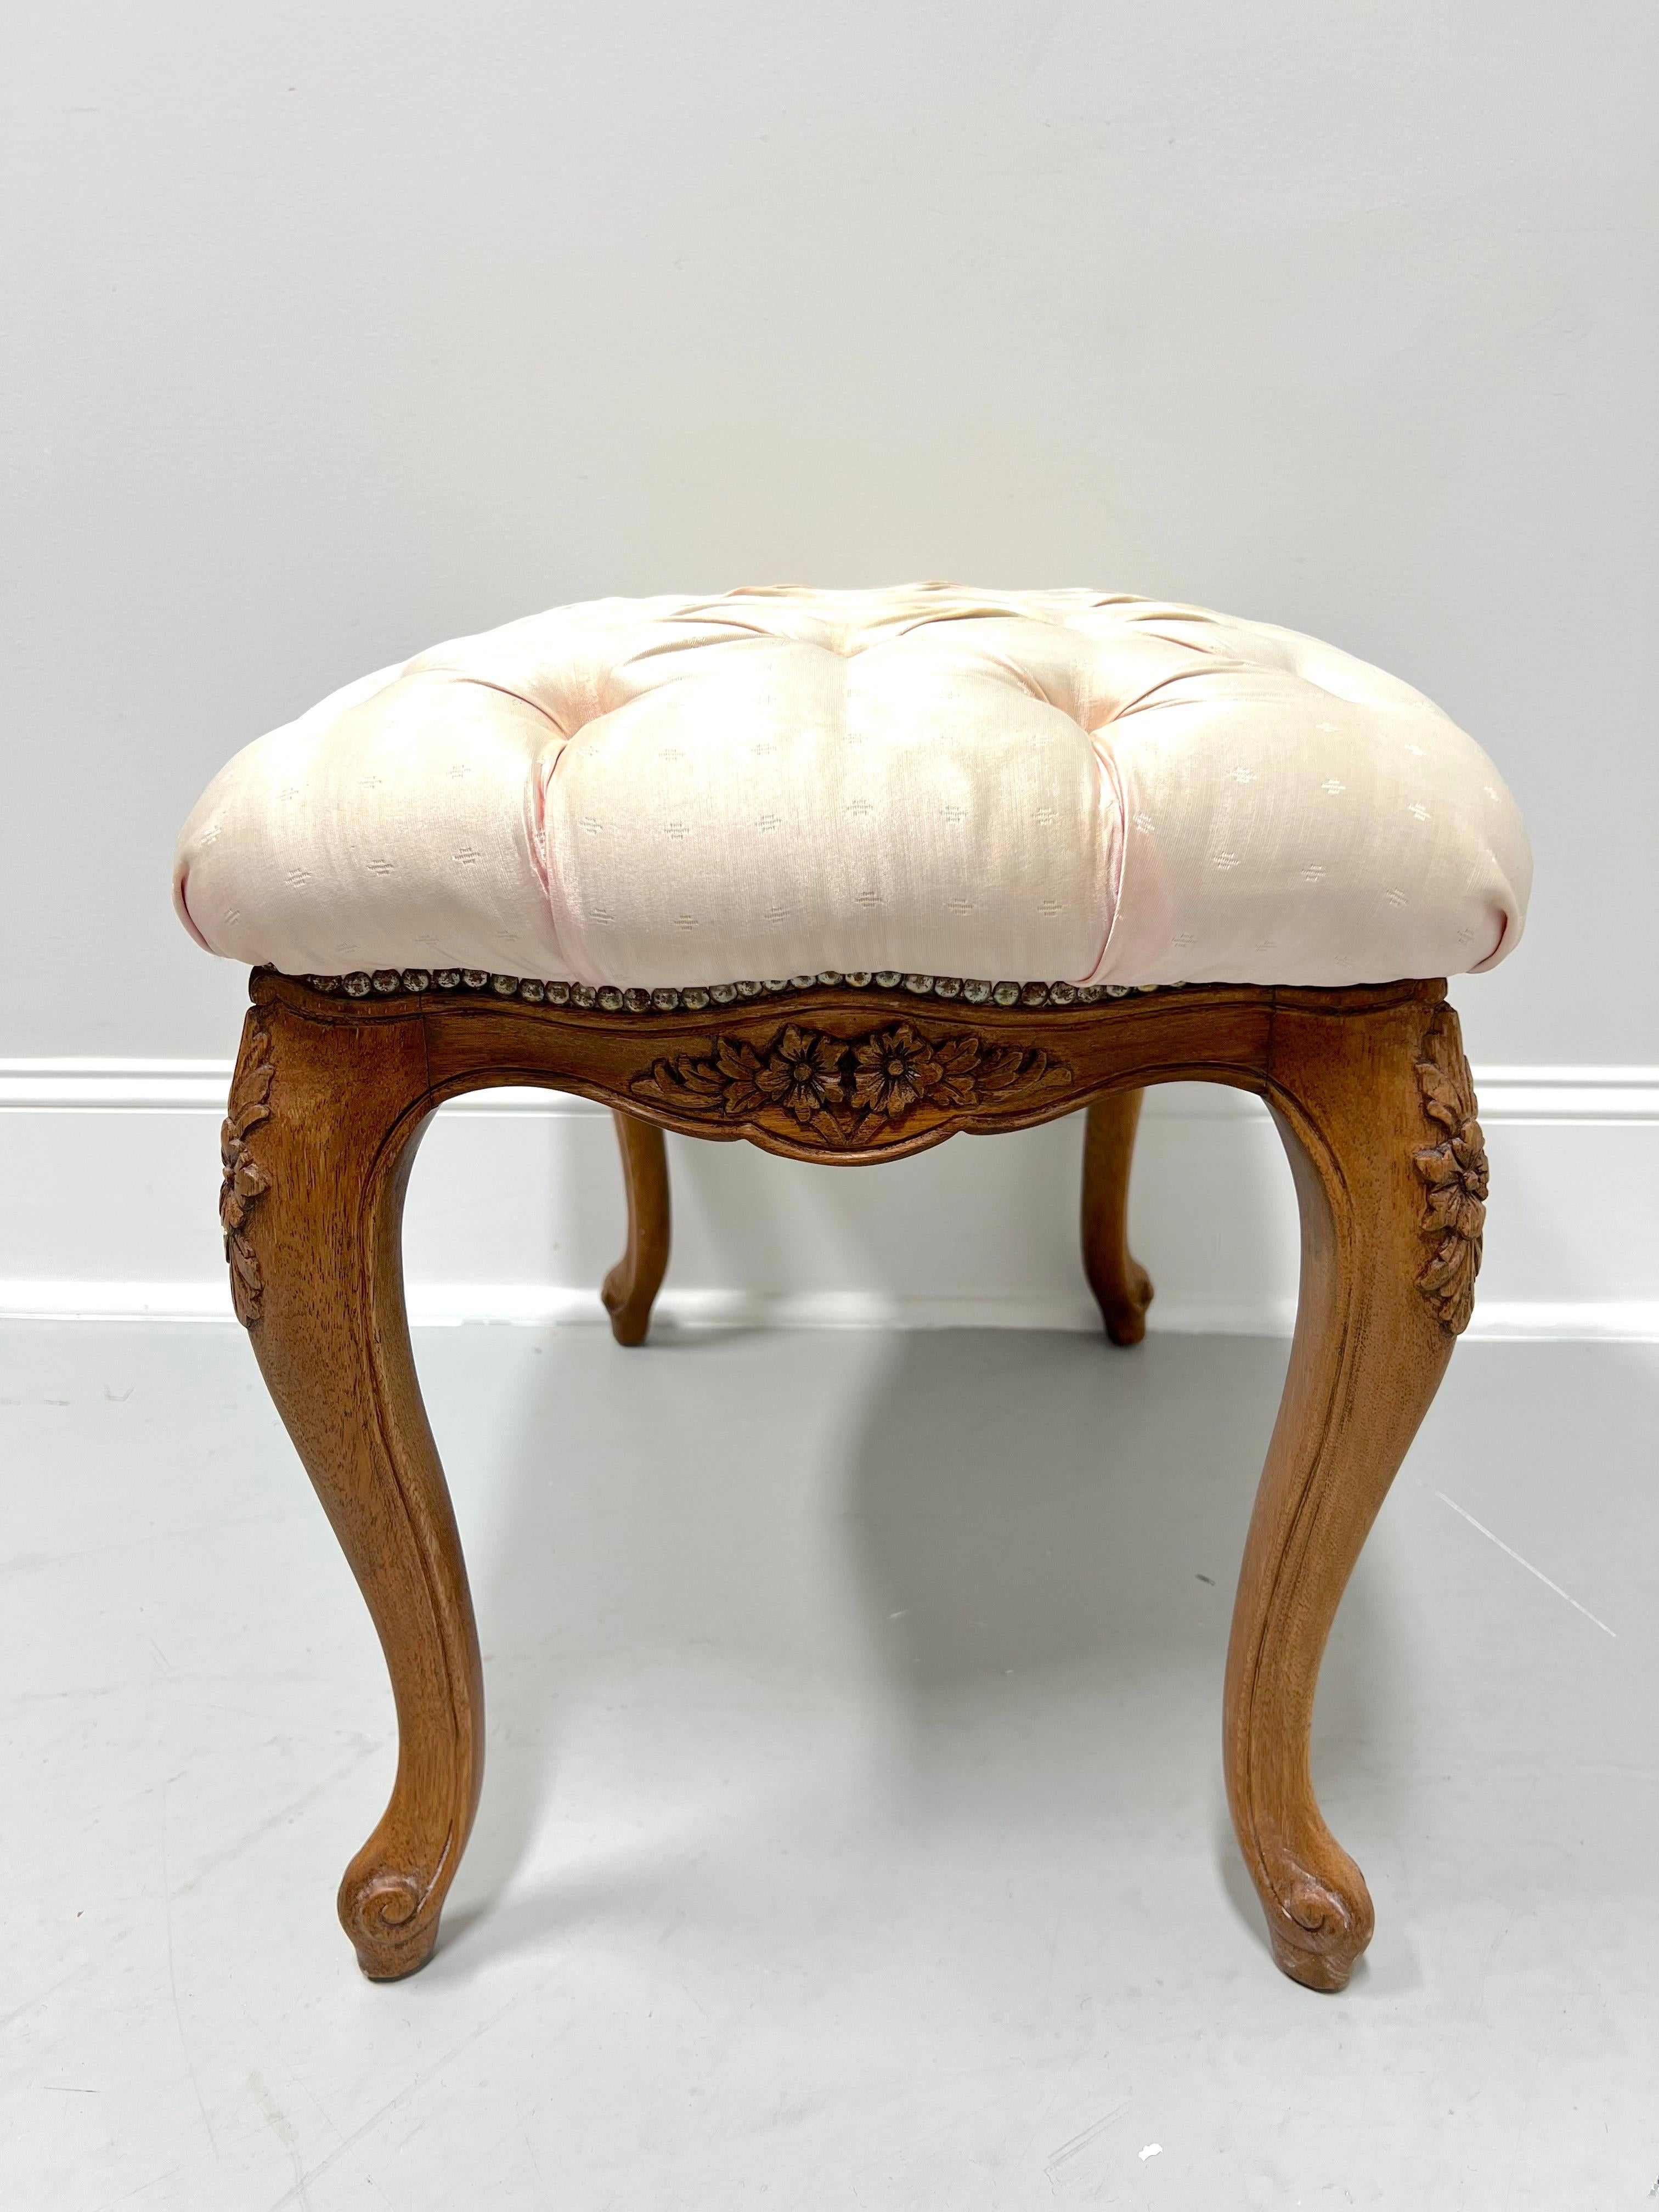 Antique 19th Century Carved Walnut French Country Vanity Bench with Tufted Silk In Good Condition For Sale In Charlotte, NC